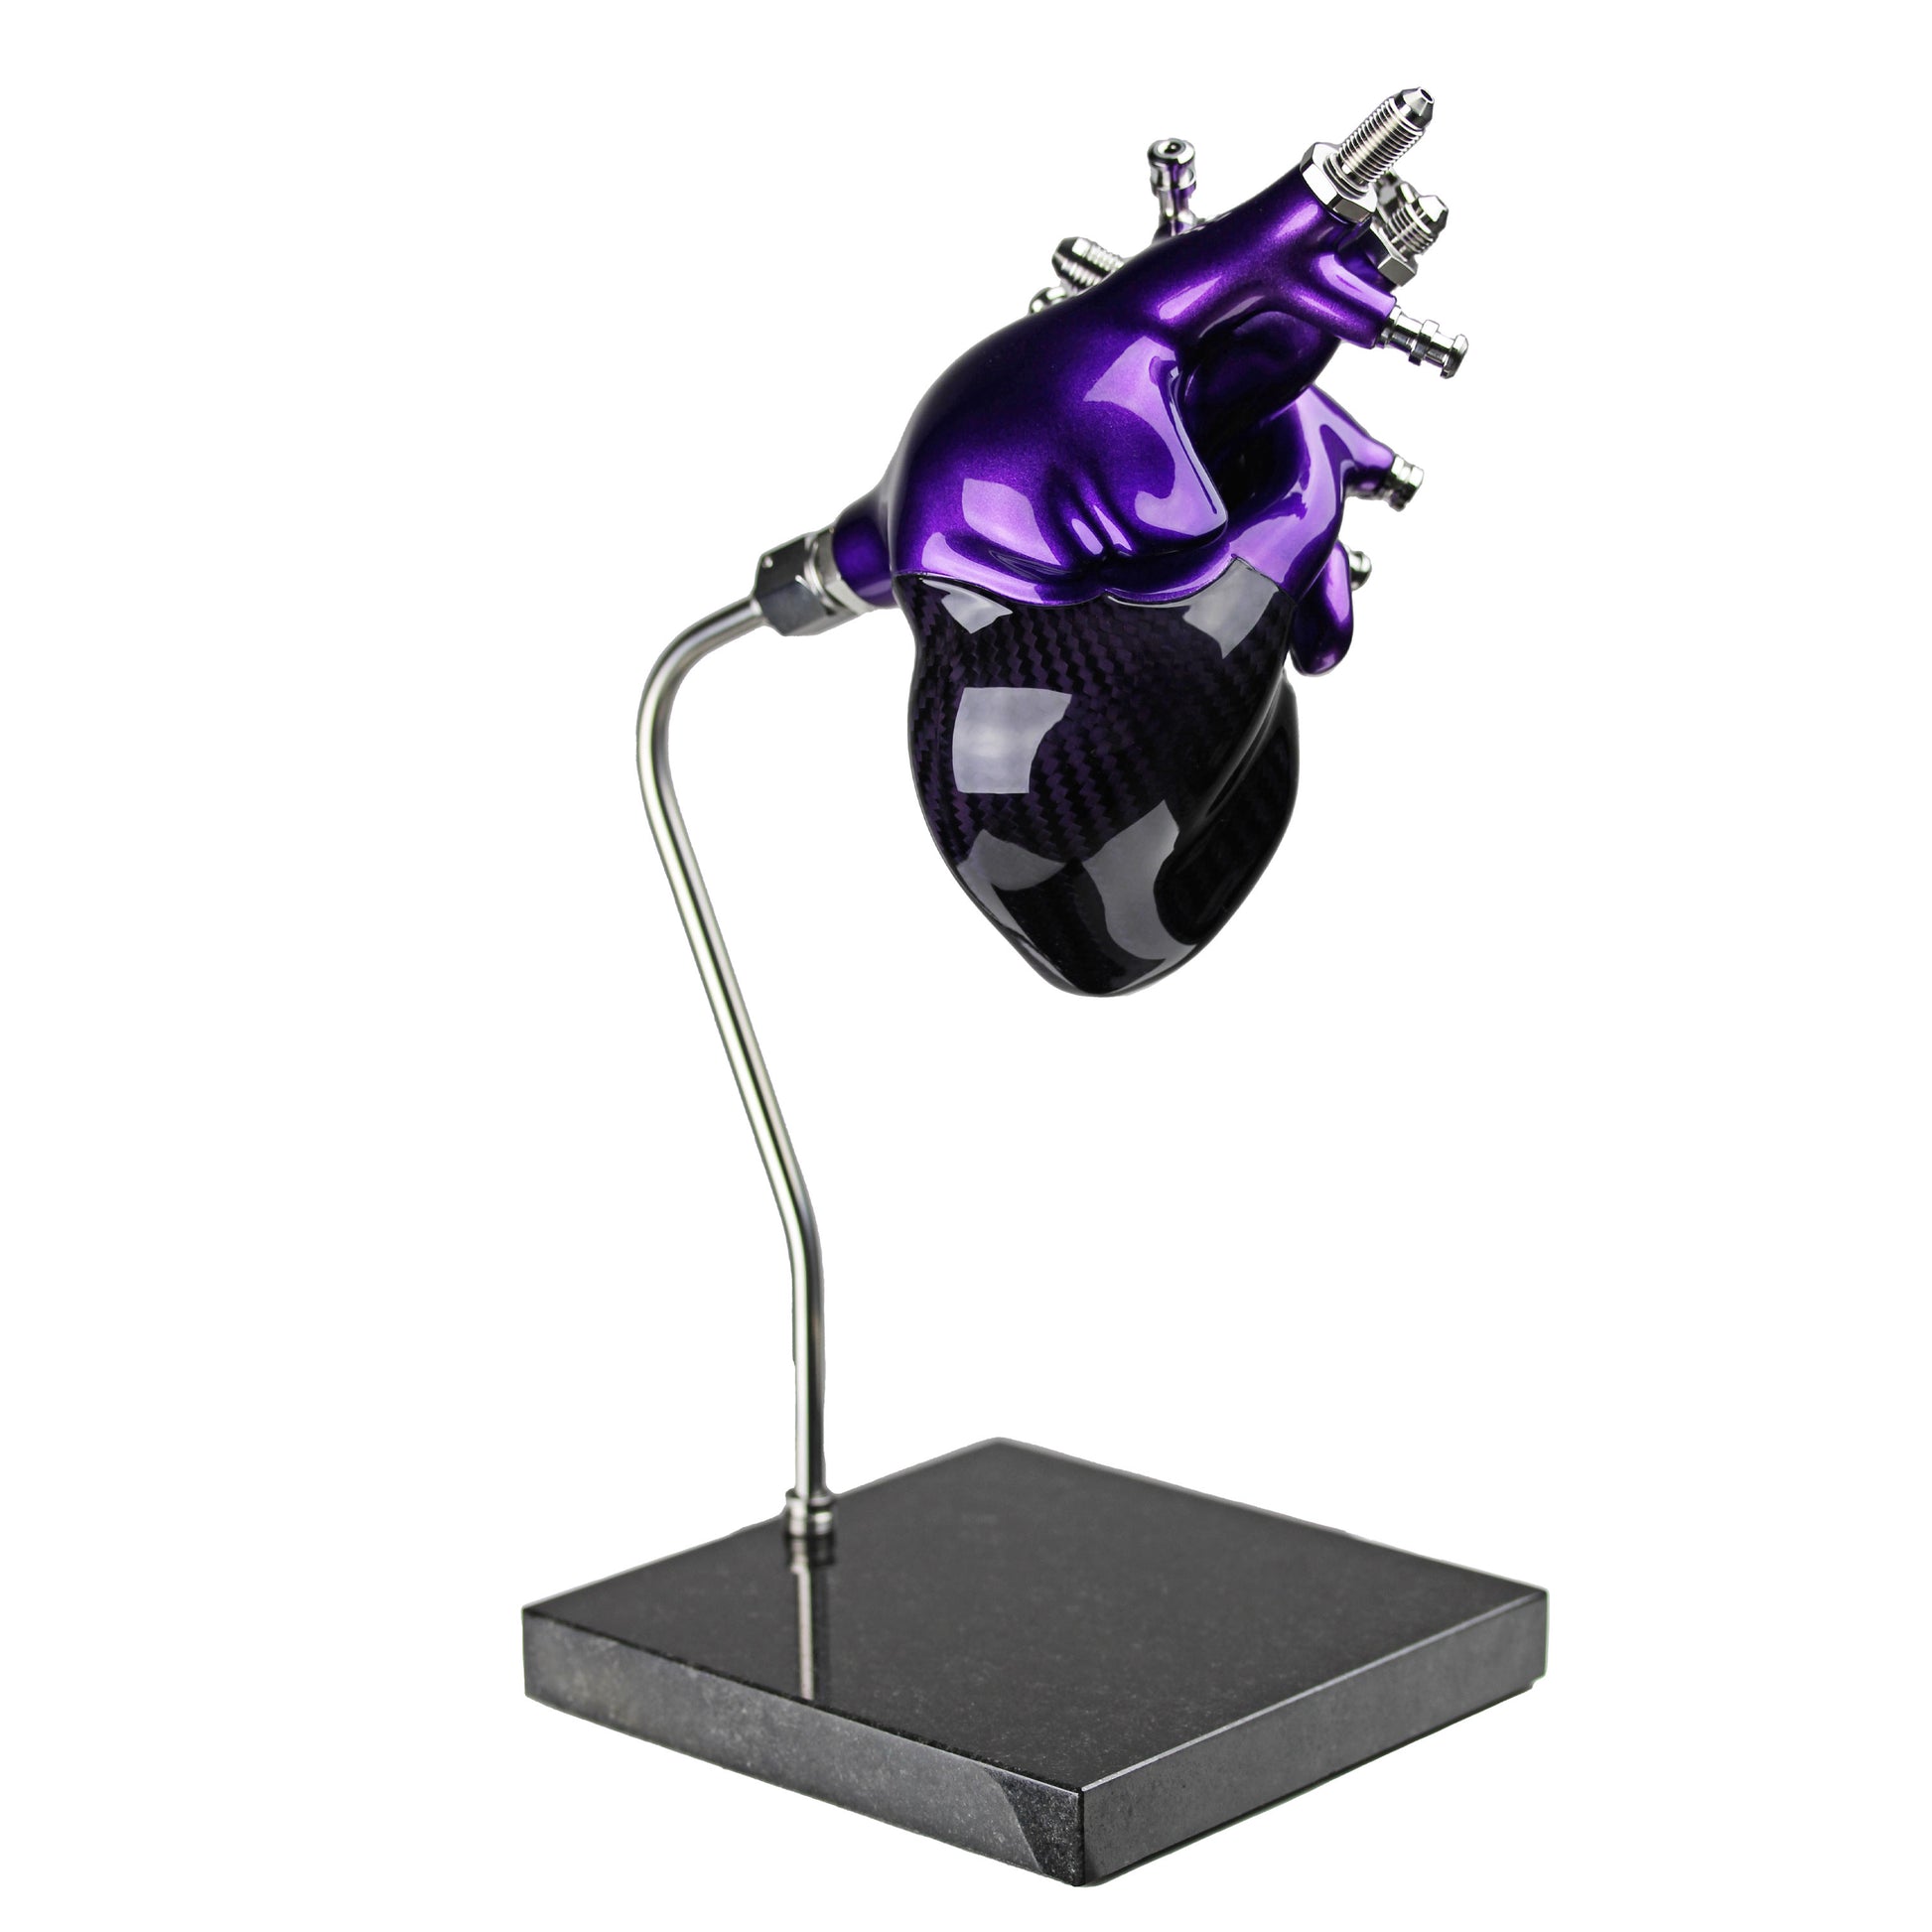 Carbon fibre human heart with purple tint and painted detail on a granite base